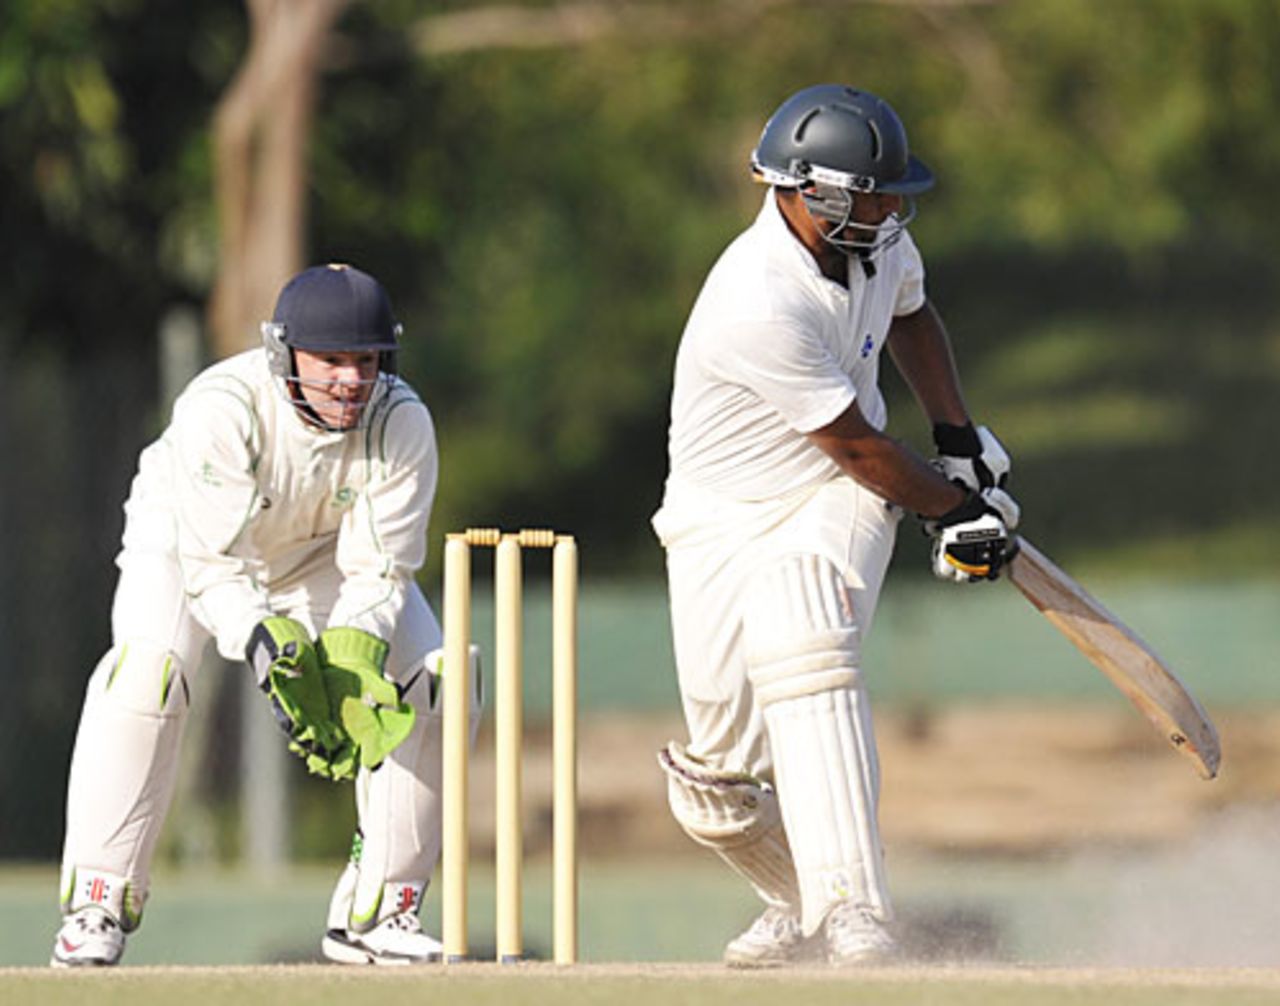 Noor Ali paddles to good effect, Afghanistan v Ireland, ICC Intercontinental Cup, Dambulla, 4th day, January 24, 2010